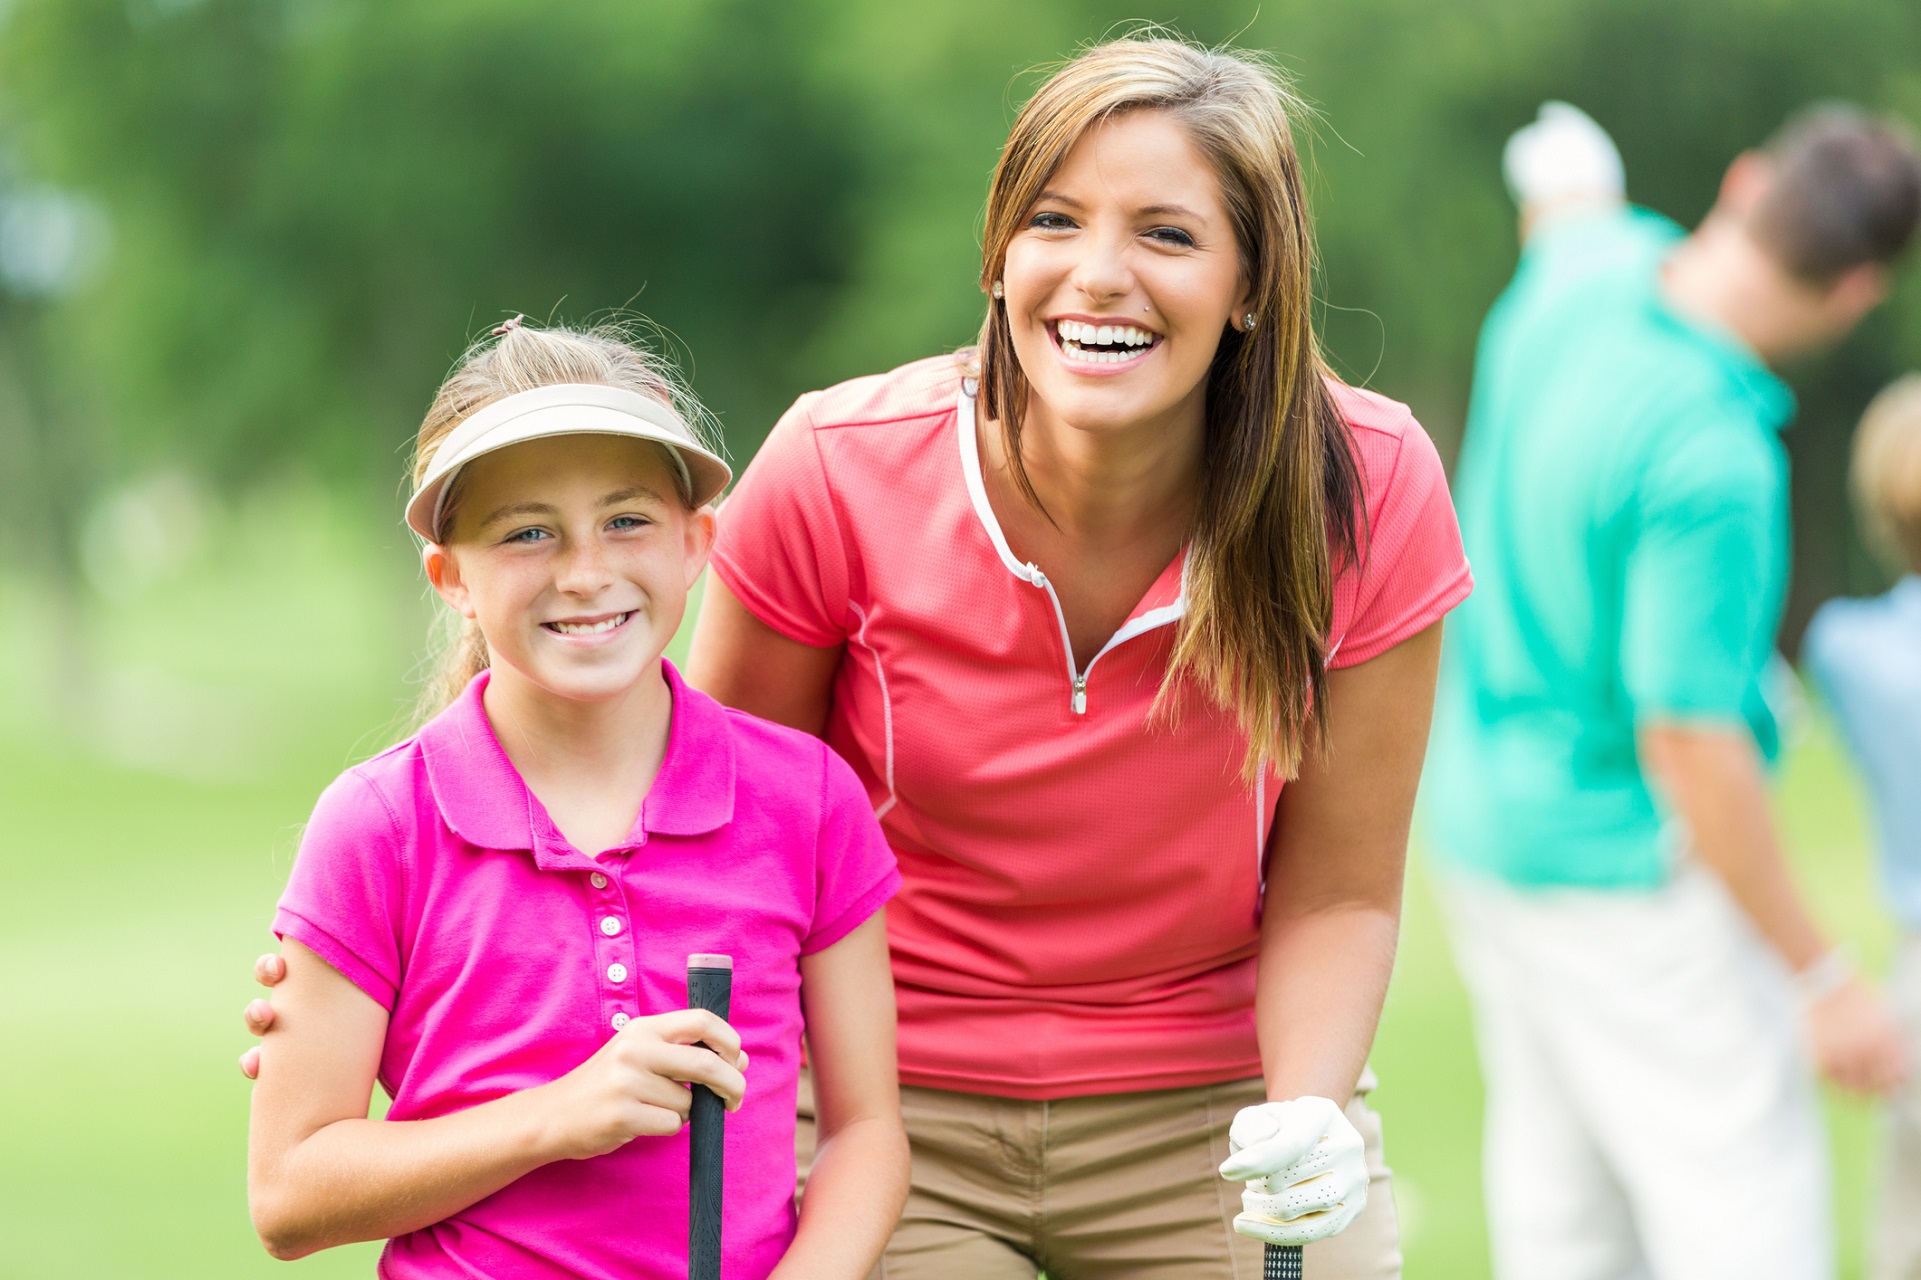 Mother have fun with daughter while playing golf together.